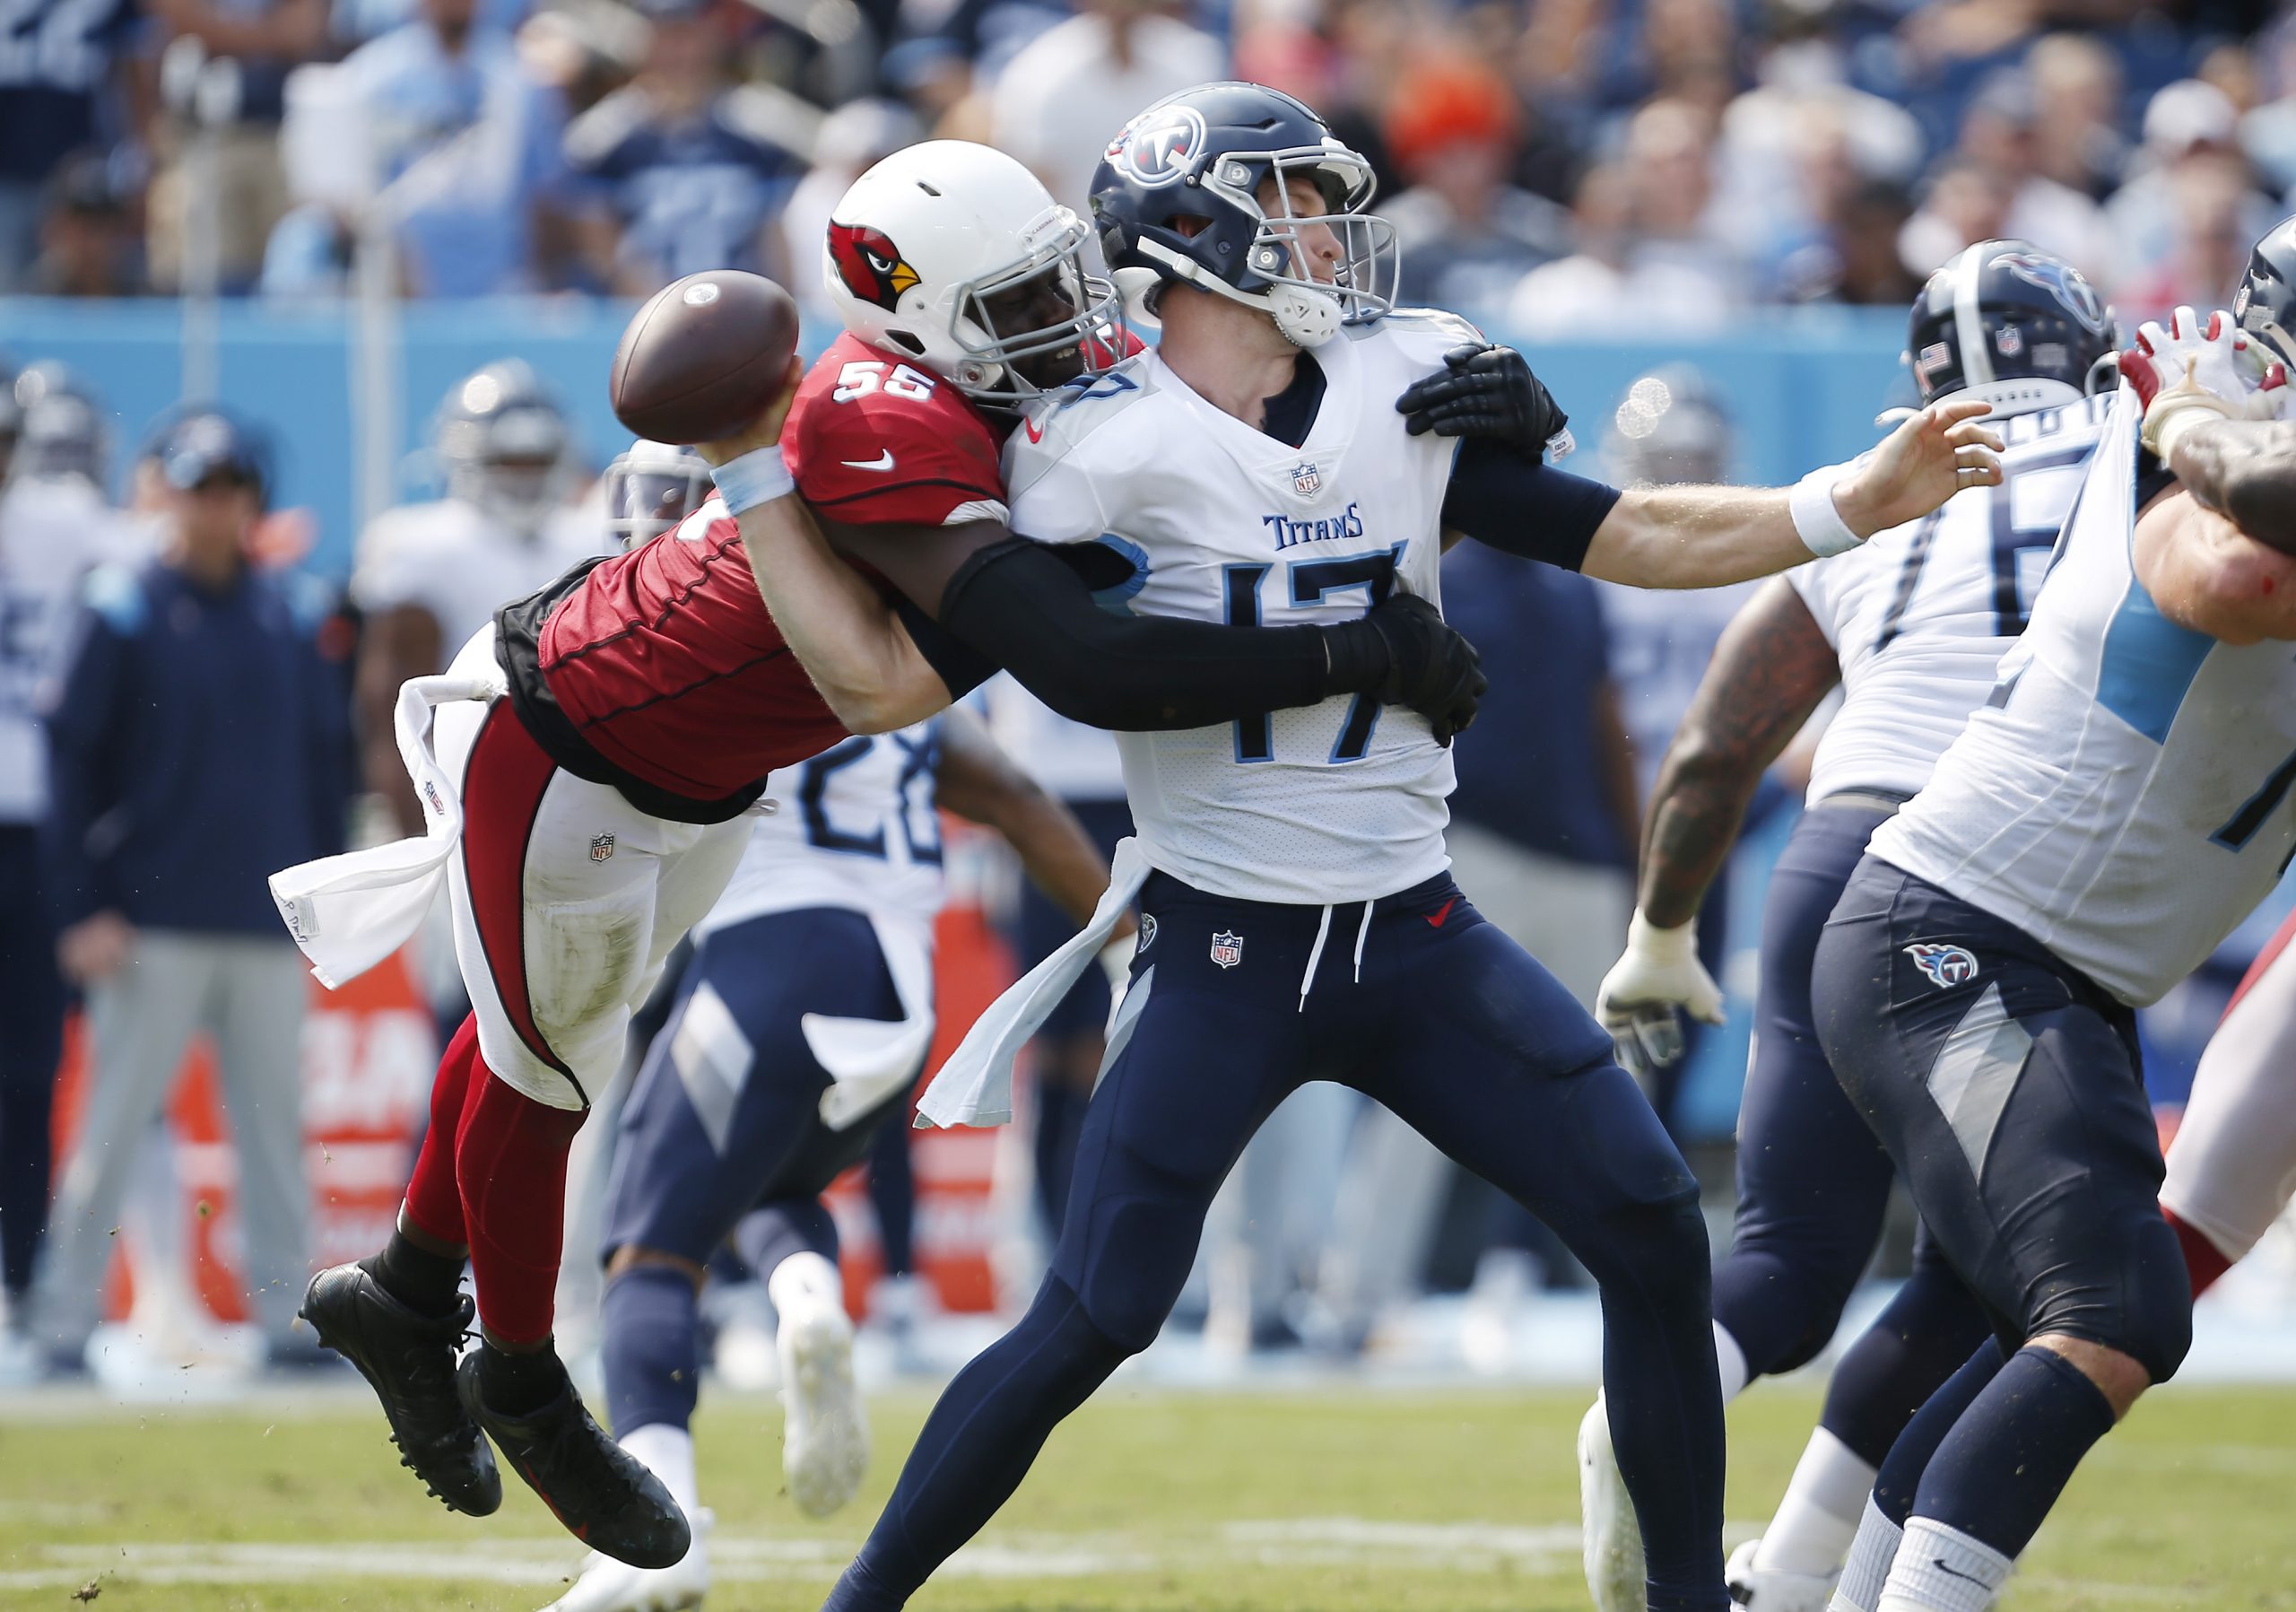 Ryan Tannehill of the Tennessee Titans fumbles after being hit by Chandler Jones.